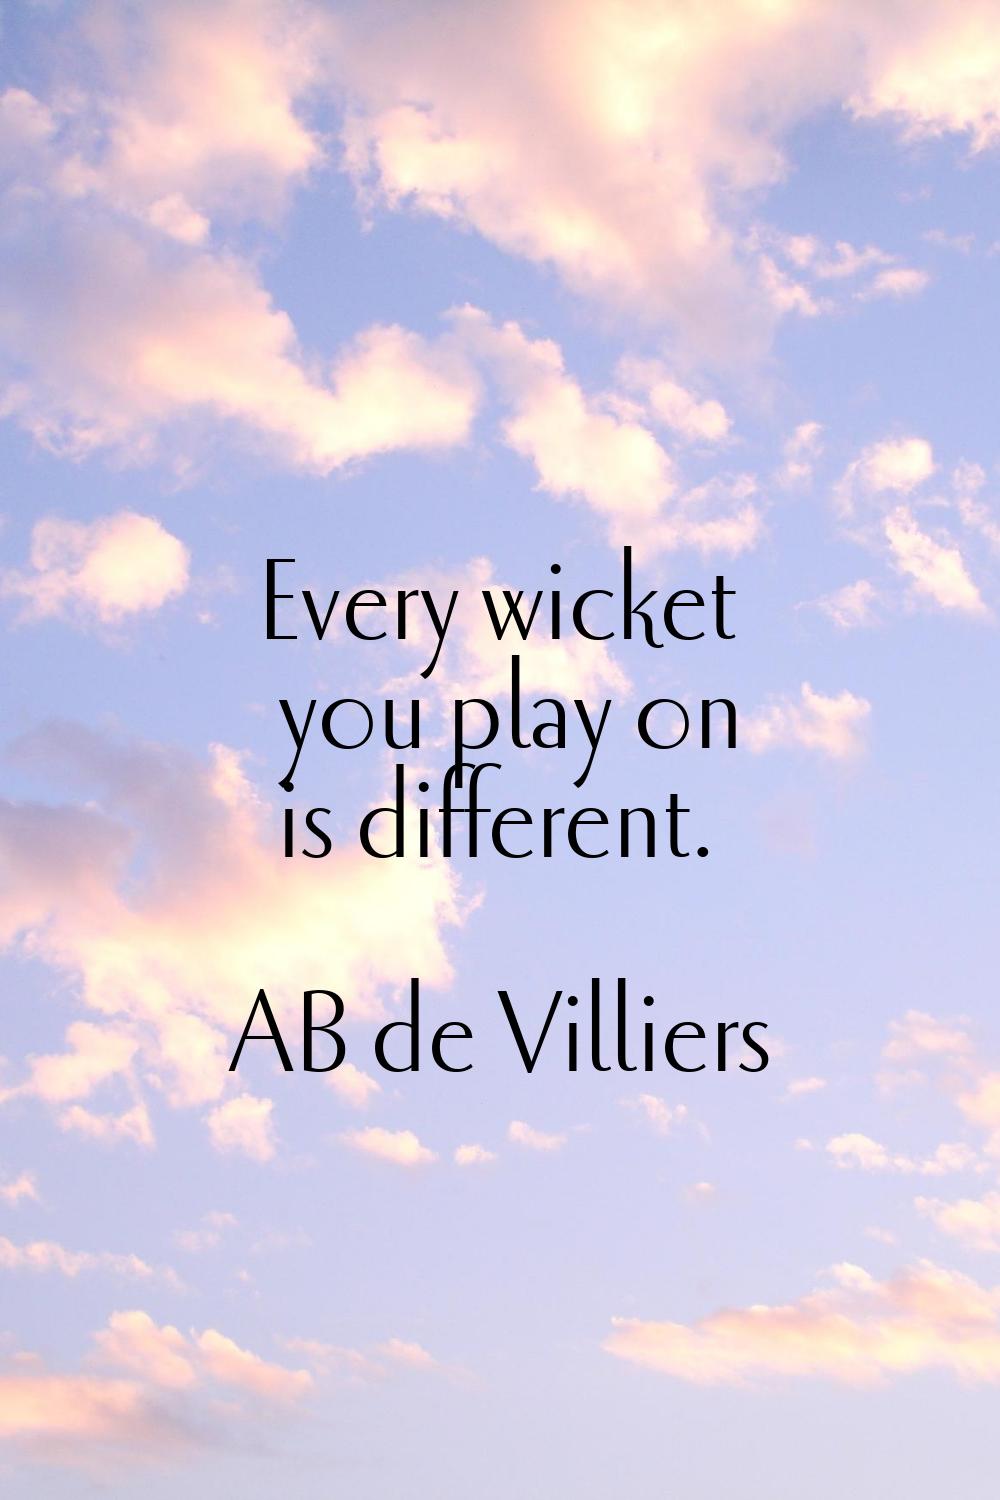 Every wicket you play on is different.